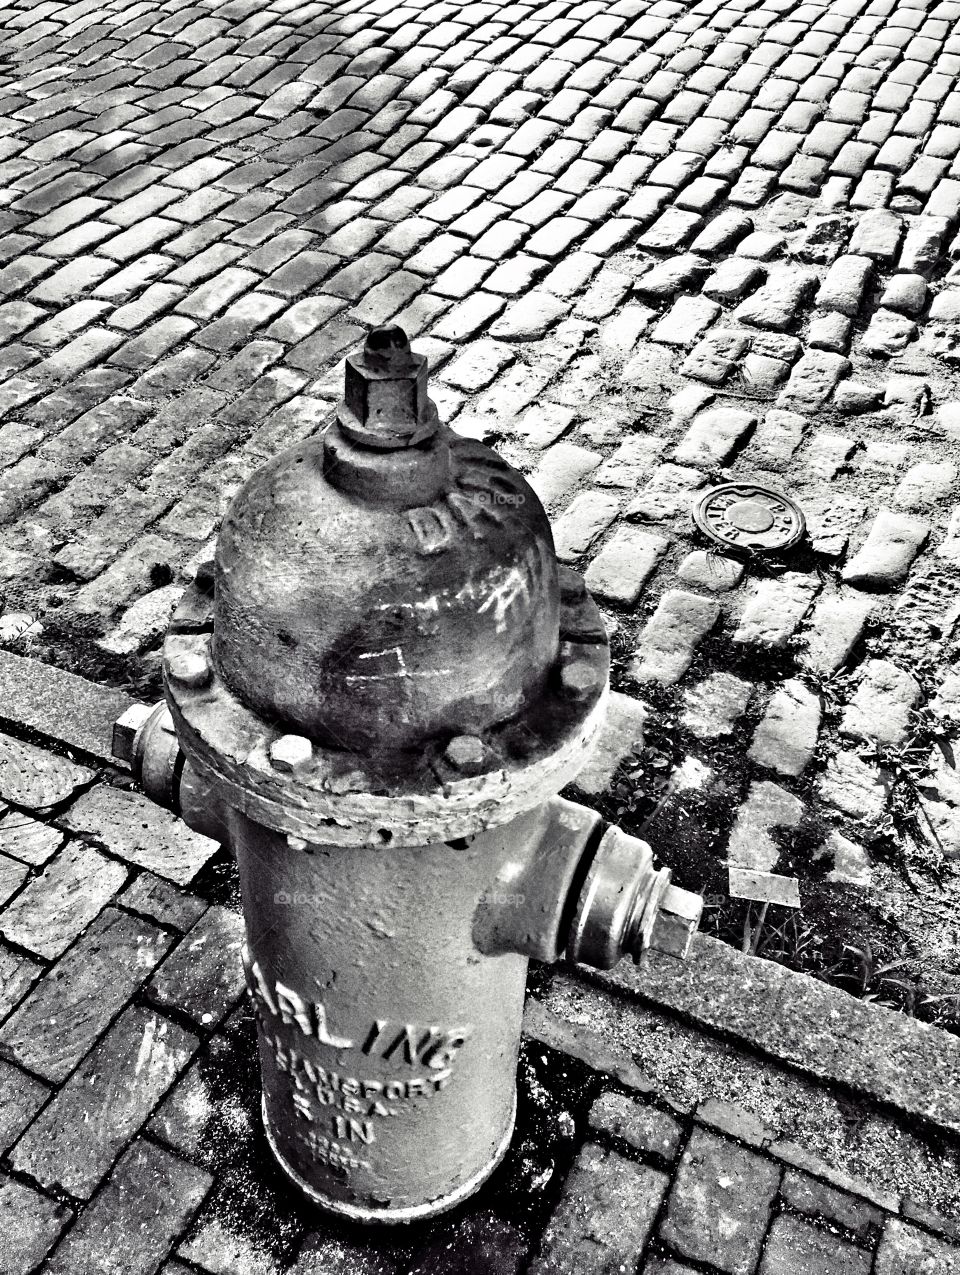 Fire Hydrant with Cobblestone Street 